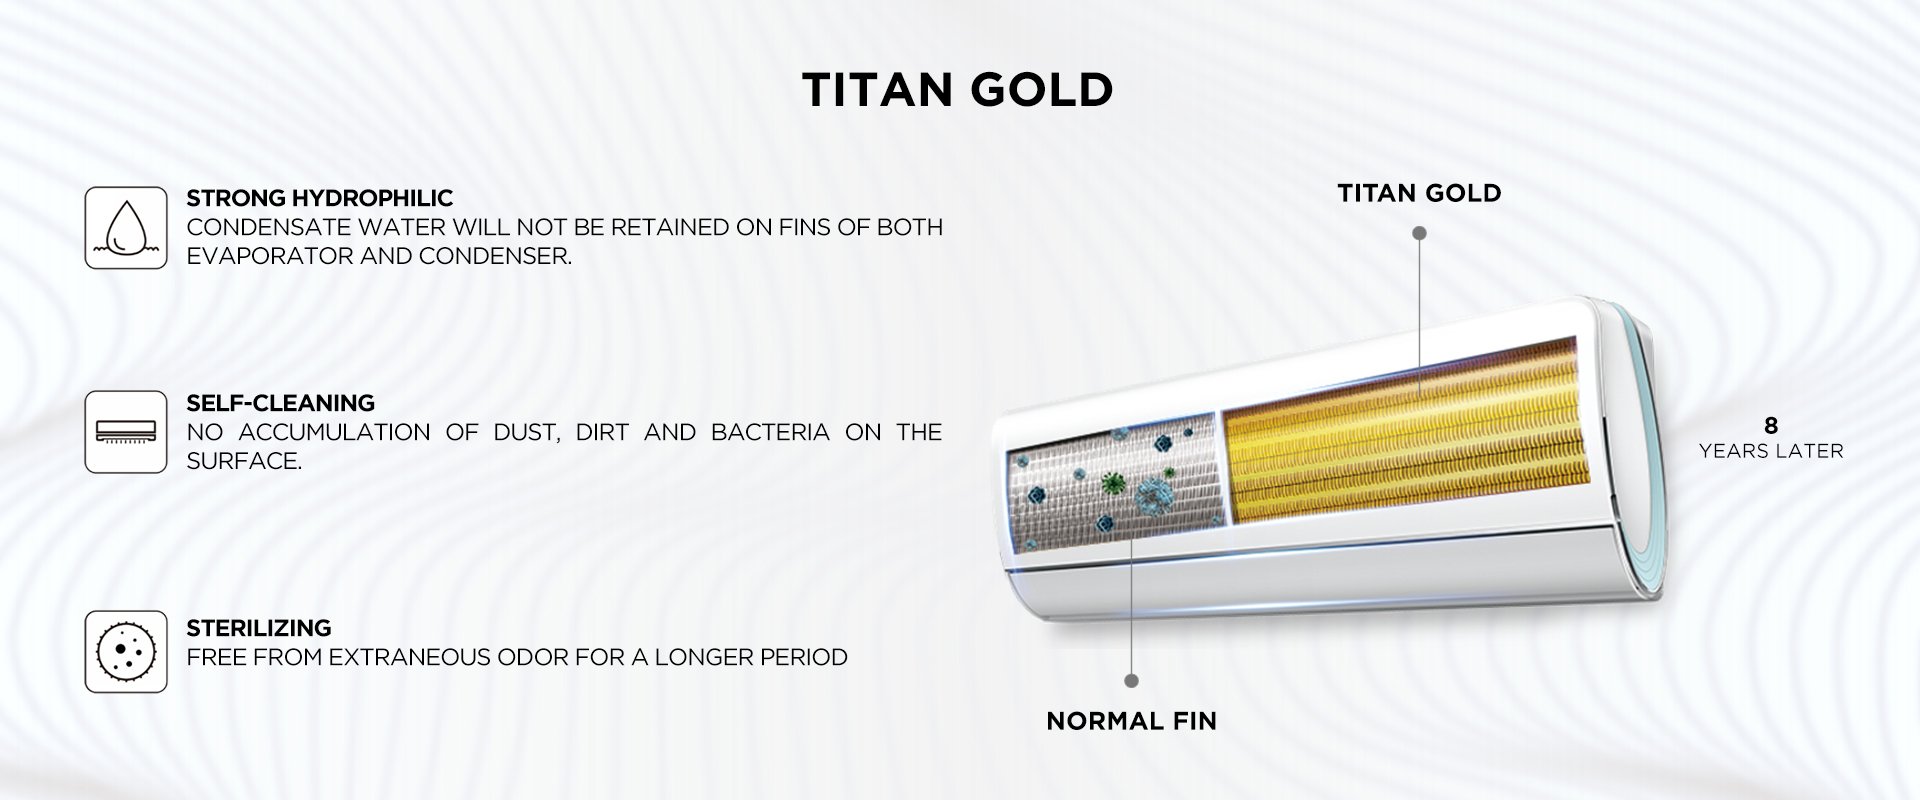  TITAN GOLD Strong Hydrophilic -Condensate water will not be retained on fins of both evaporator and condenser. - Self-cleaning No accumulation of dust, dirt and bacteria on the surface. - Sterilizing Free from extraneous odor for a longer period